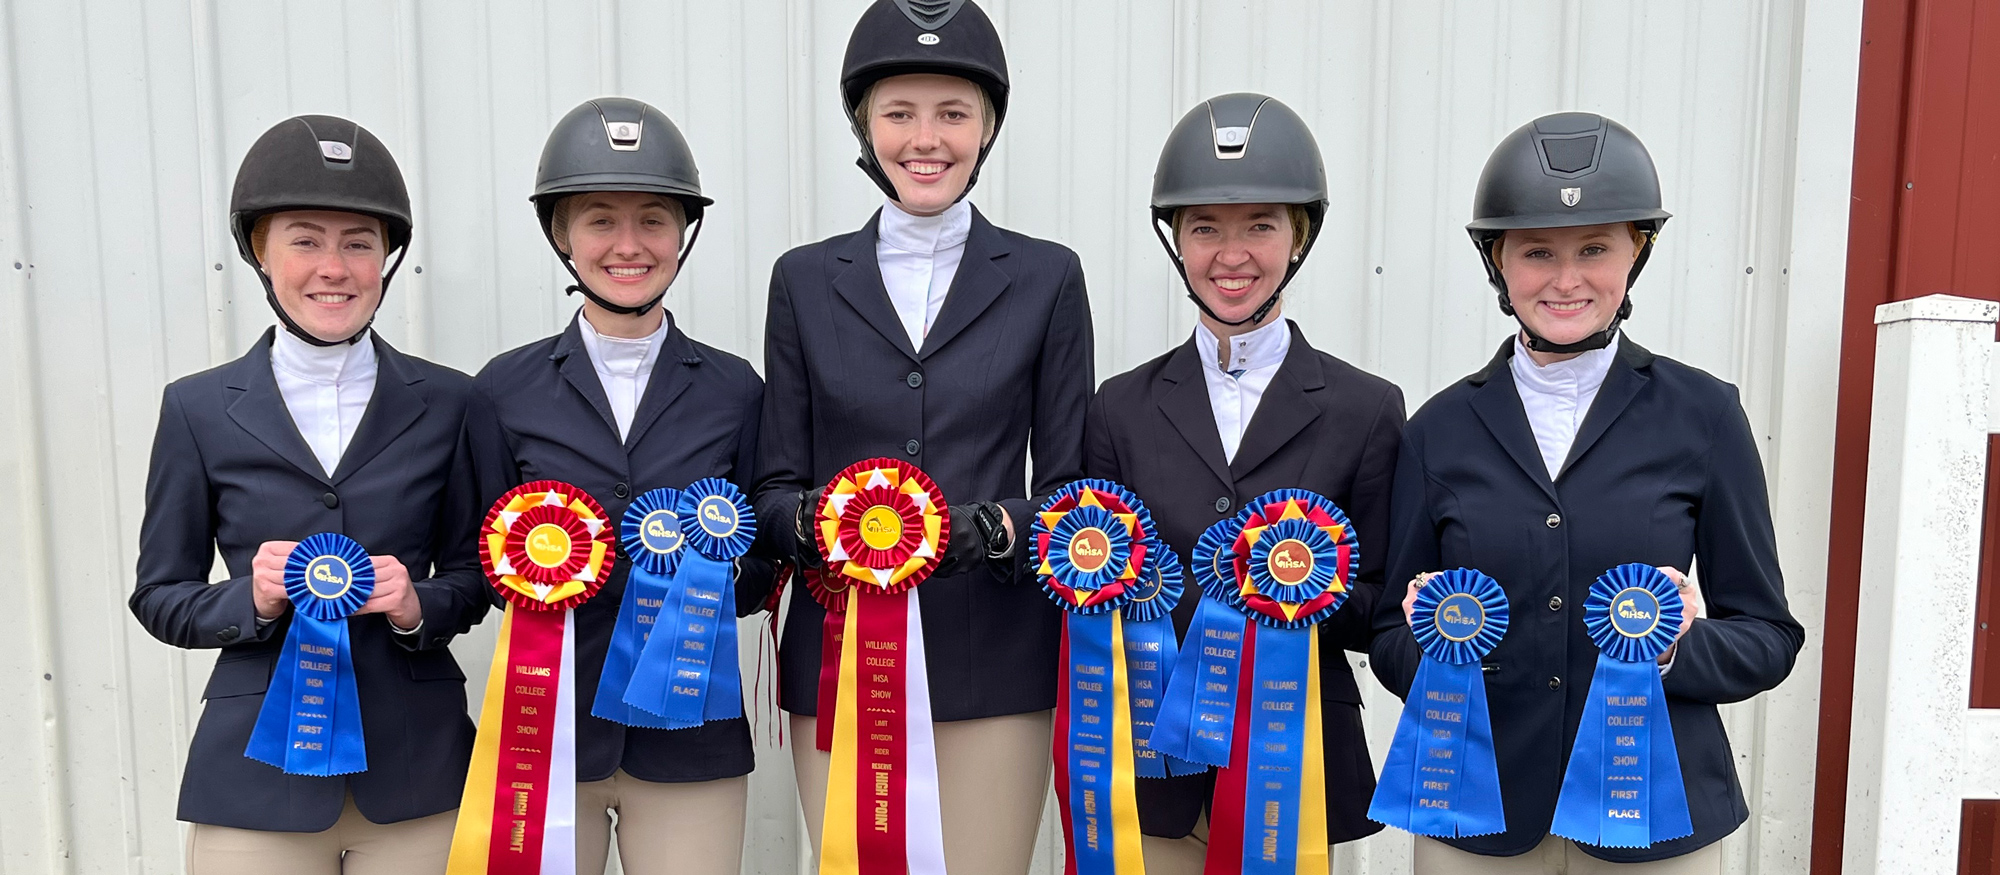 Left to right are the Mount Holyoke's High Point and Reserve Riders from the Williams College Show on Oct. 14, 2023 at Bonnie Lea Farm: Catherine Kazel, Helena Weiss, Chloe McElveen, Emmalyn Mirarchi, Mara Downie.